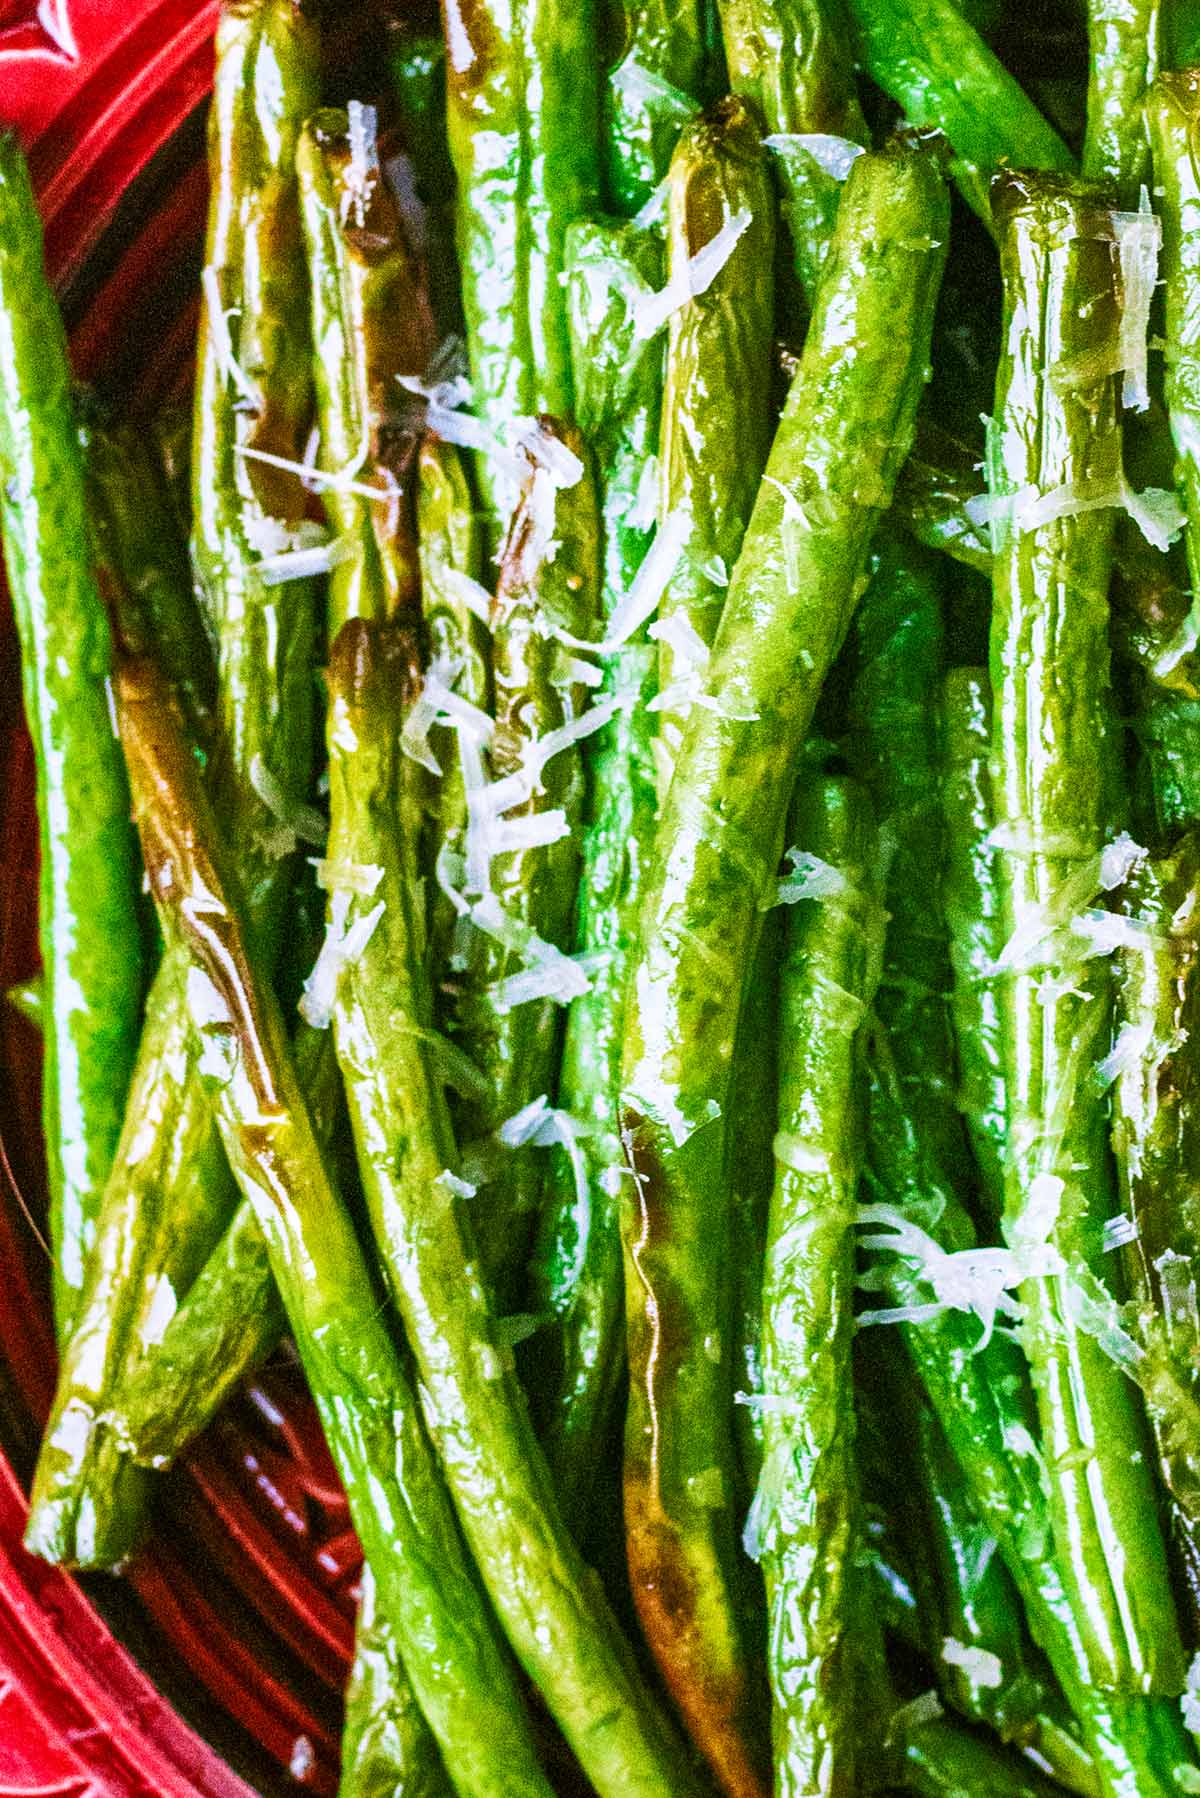 Cooked green beans with grated Parmesan melting on them.